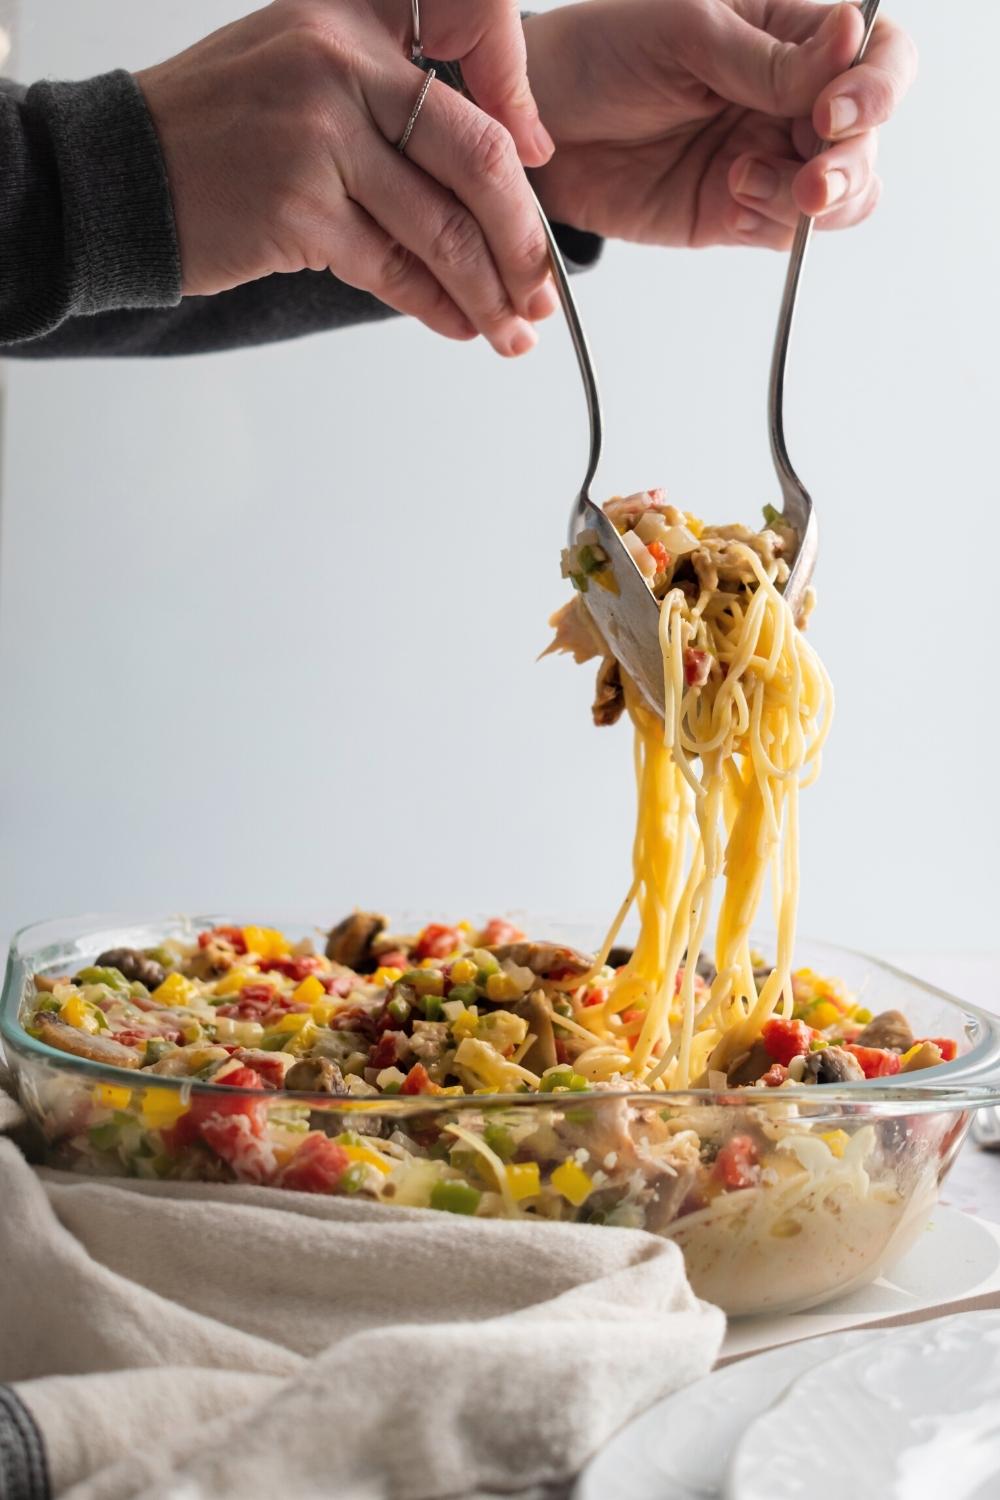 Two hands holding utensils with spaghetti between them, hovering over a glass casserole dish with the Texas chicken spaghetti in it.